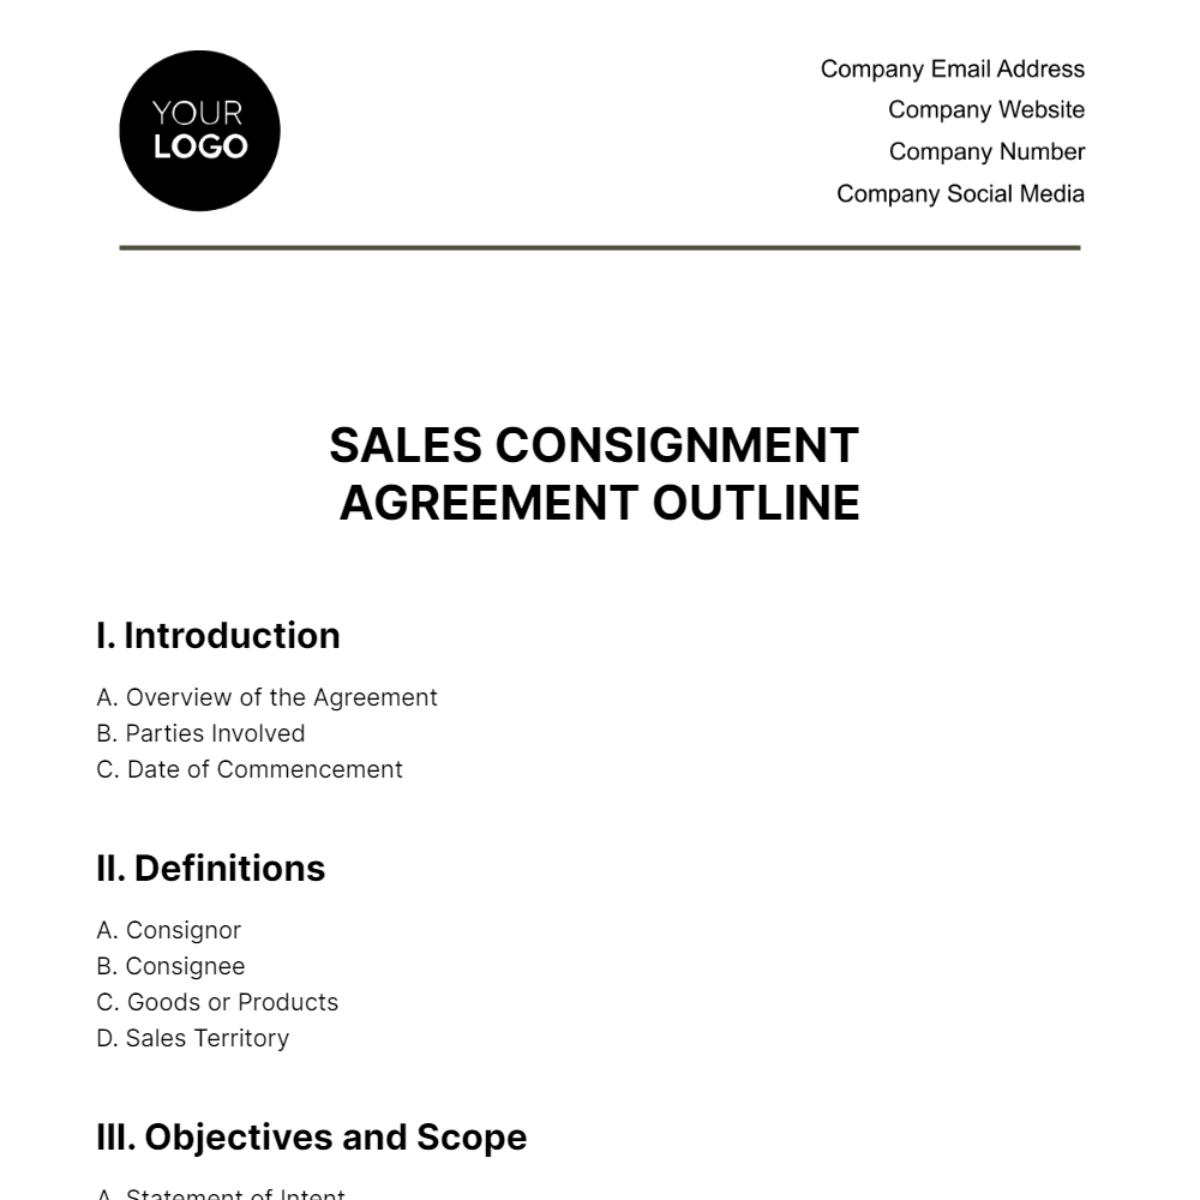 Sales Consignment Agreement Outline Template